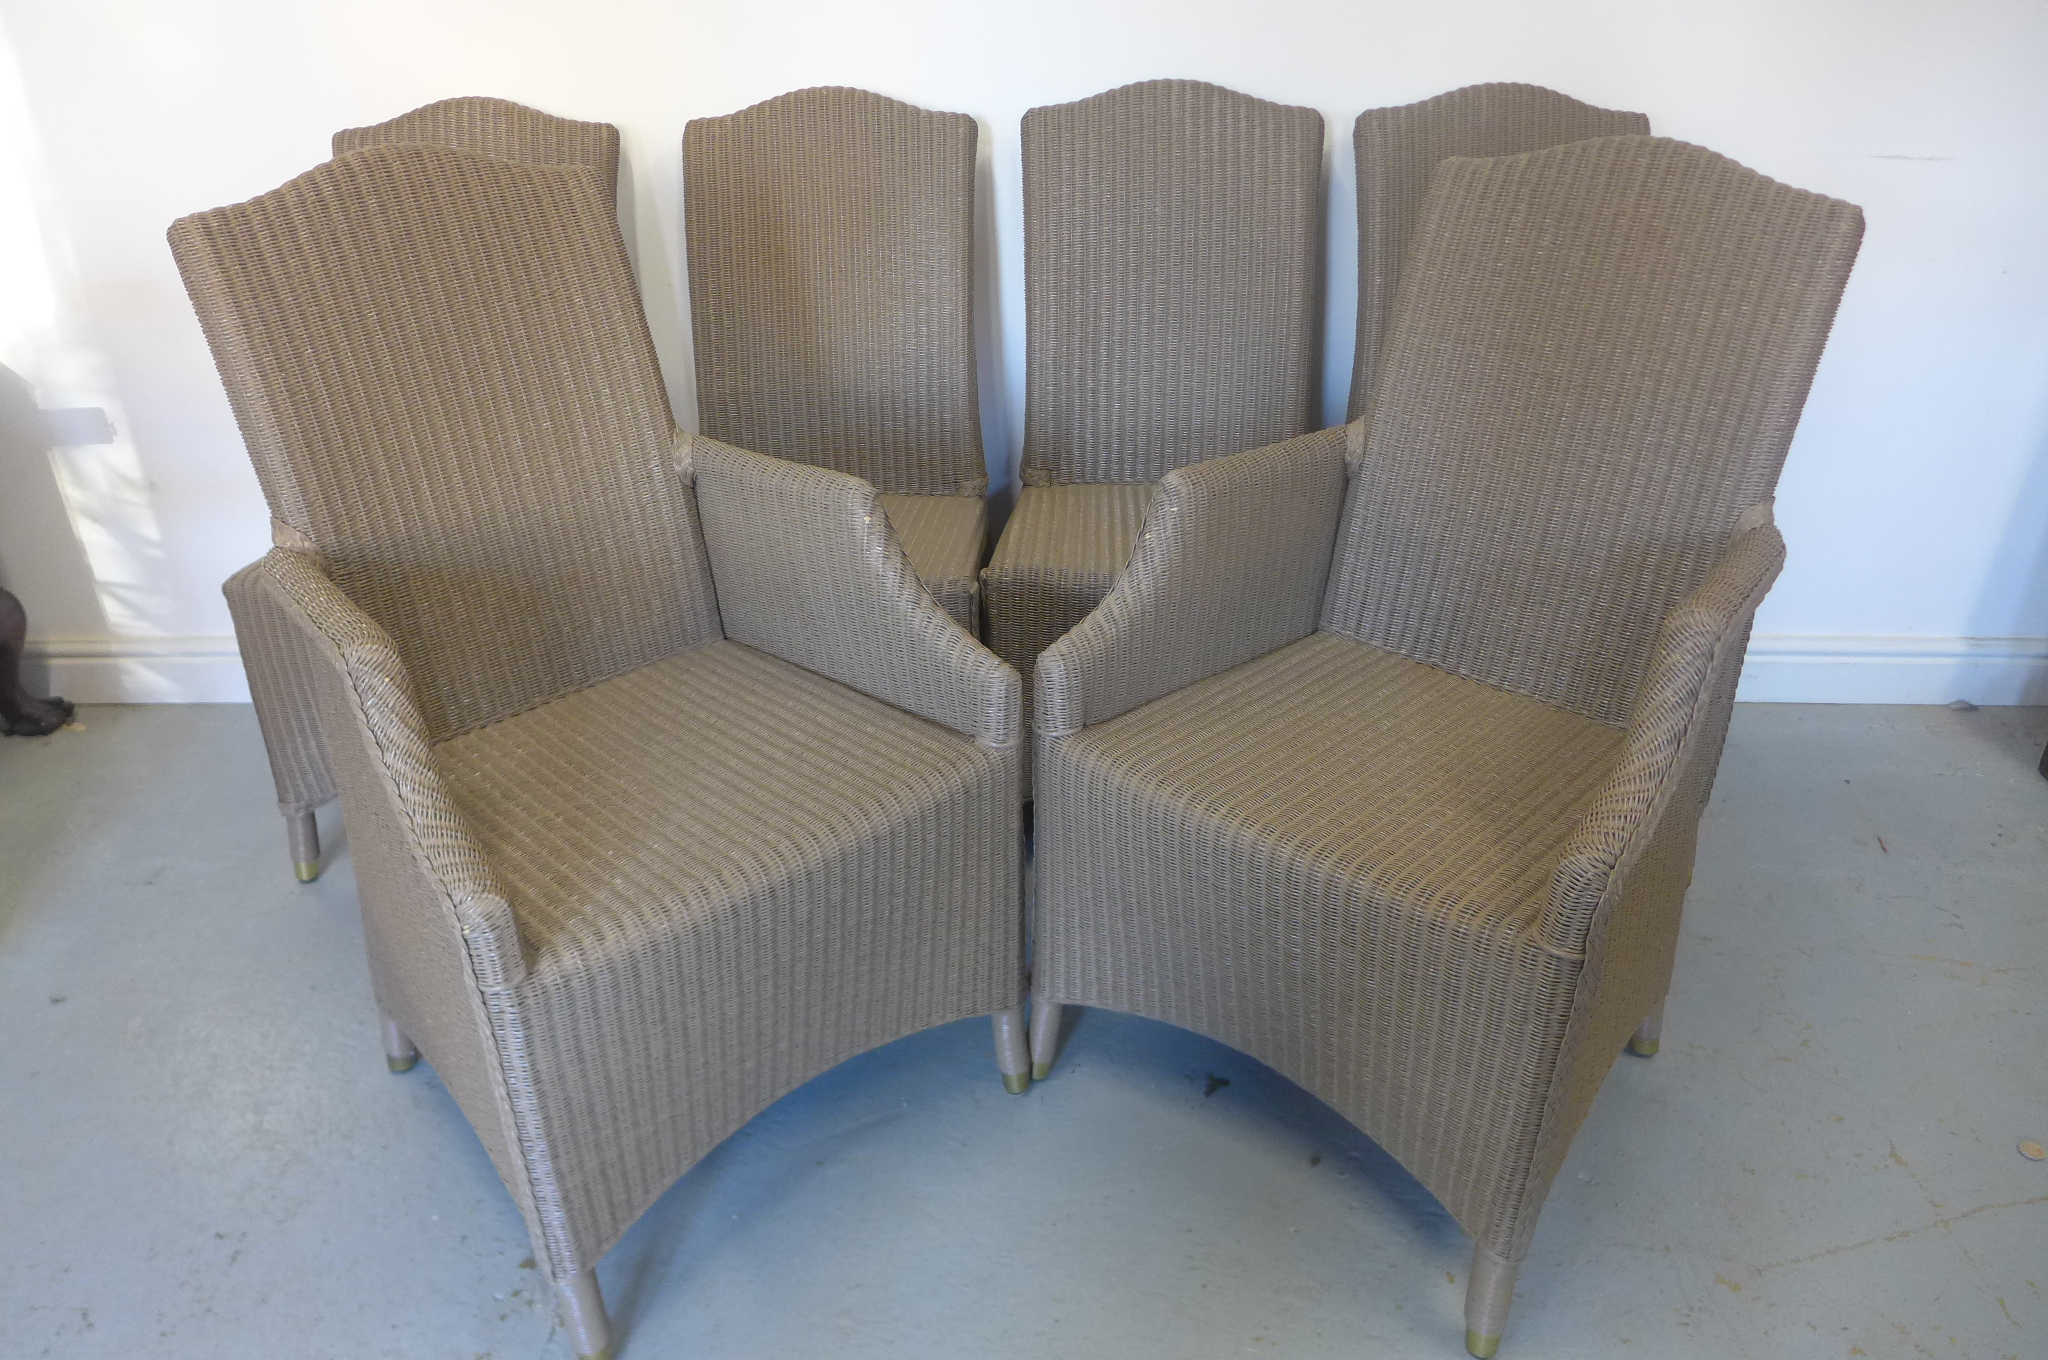 A set of six Vincent Sheppard Louis Lloyd loom weave chairs, four singles and two armchairs, some